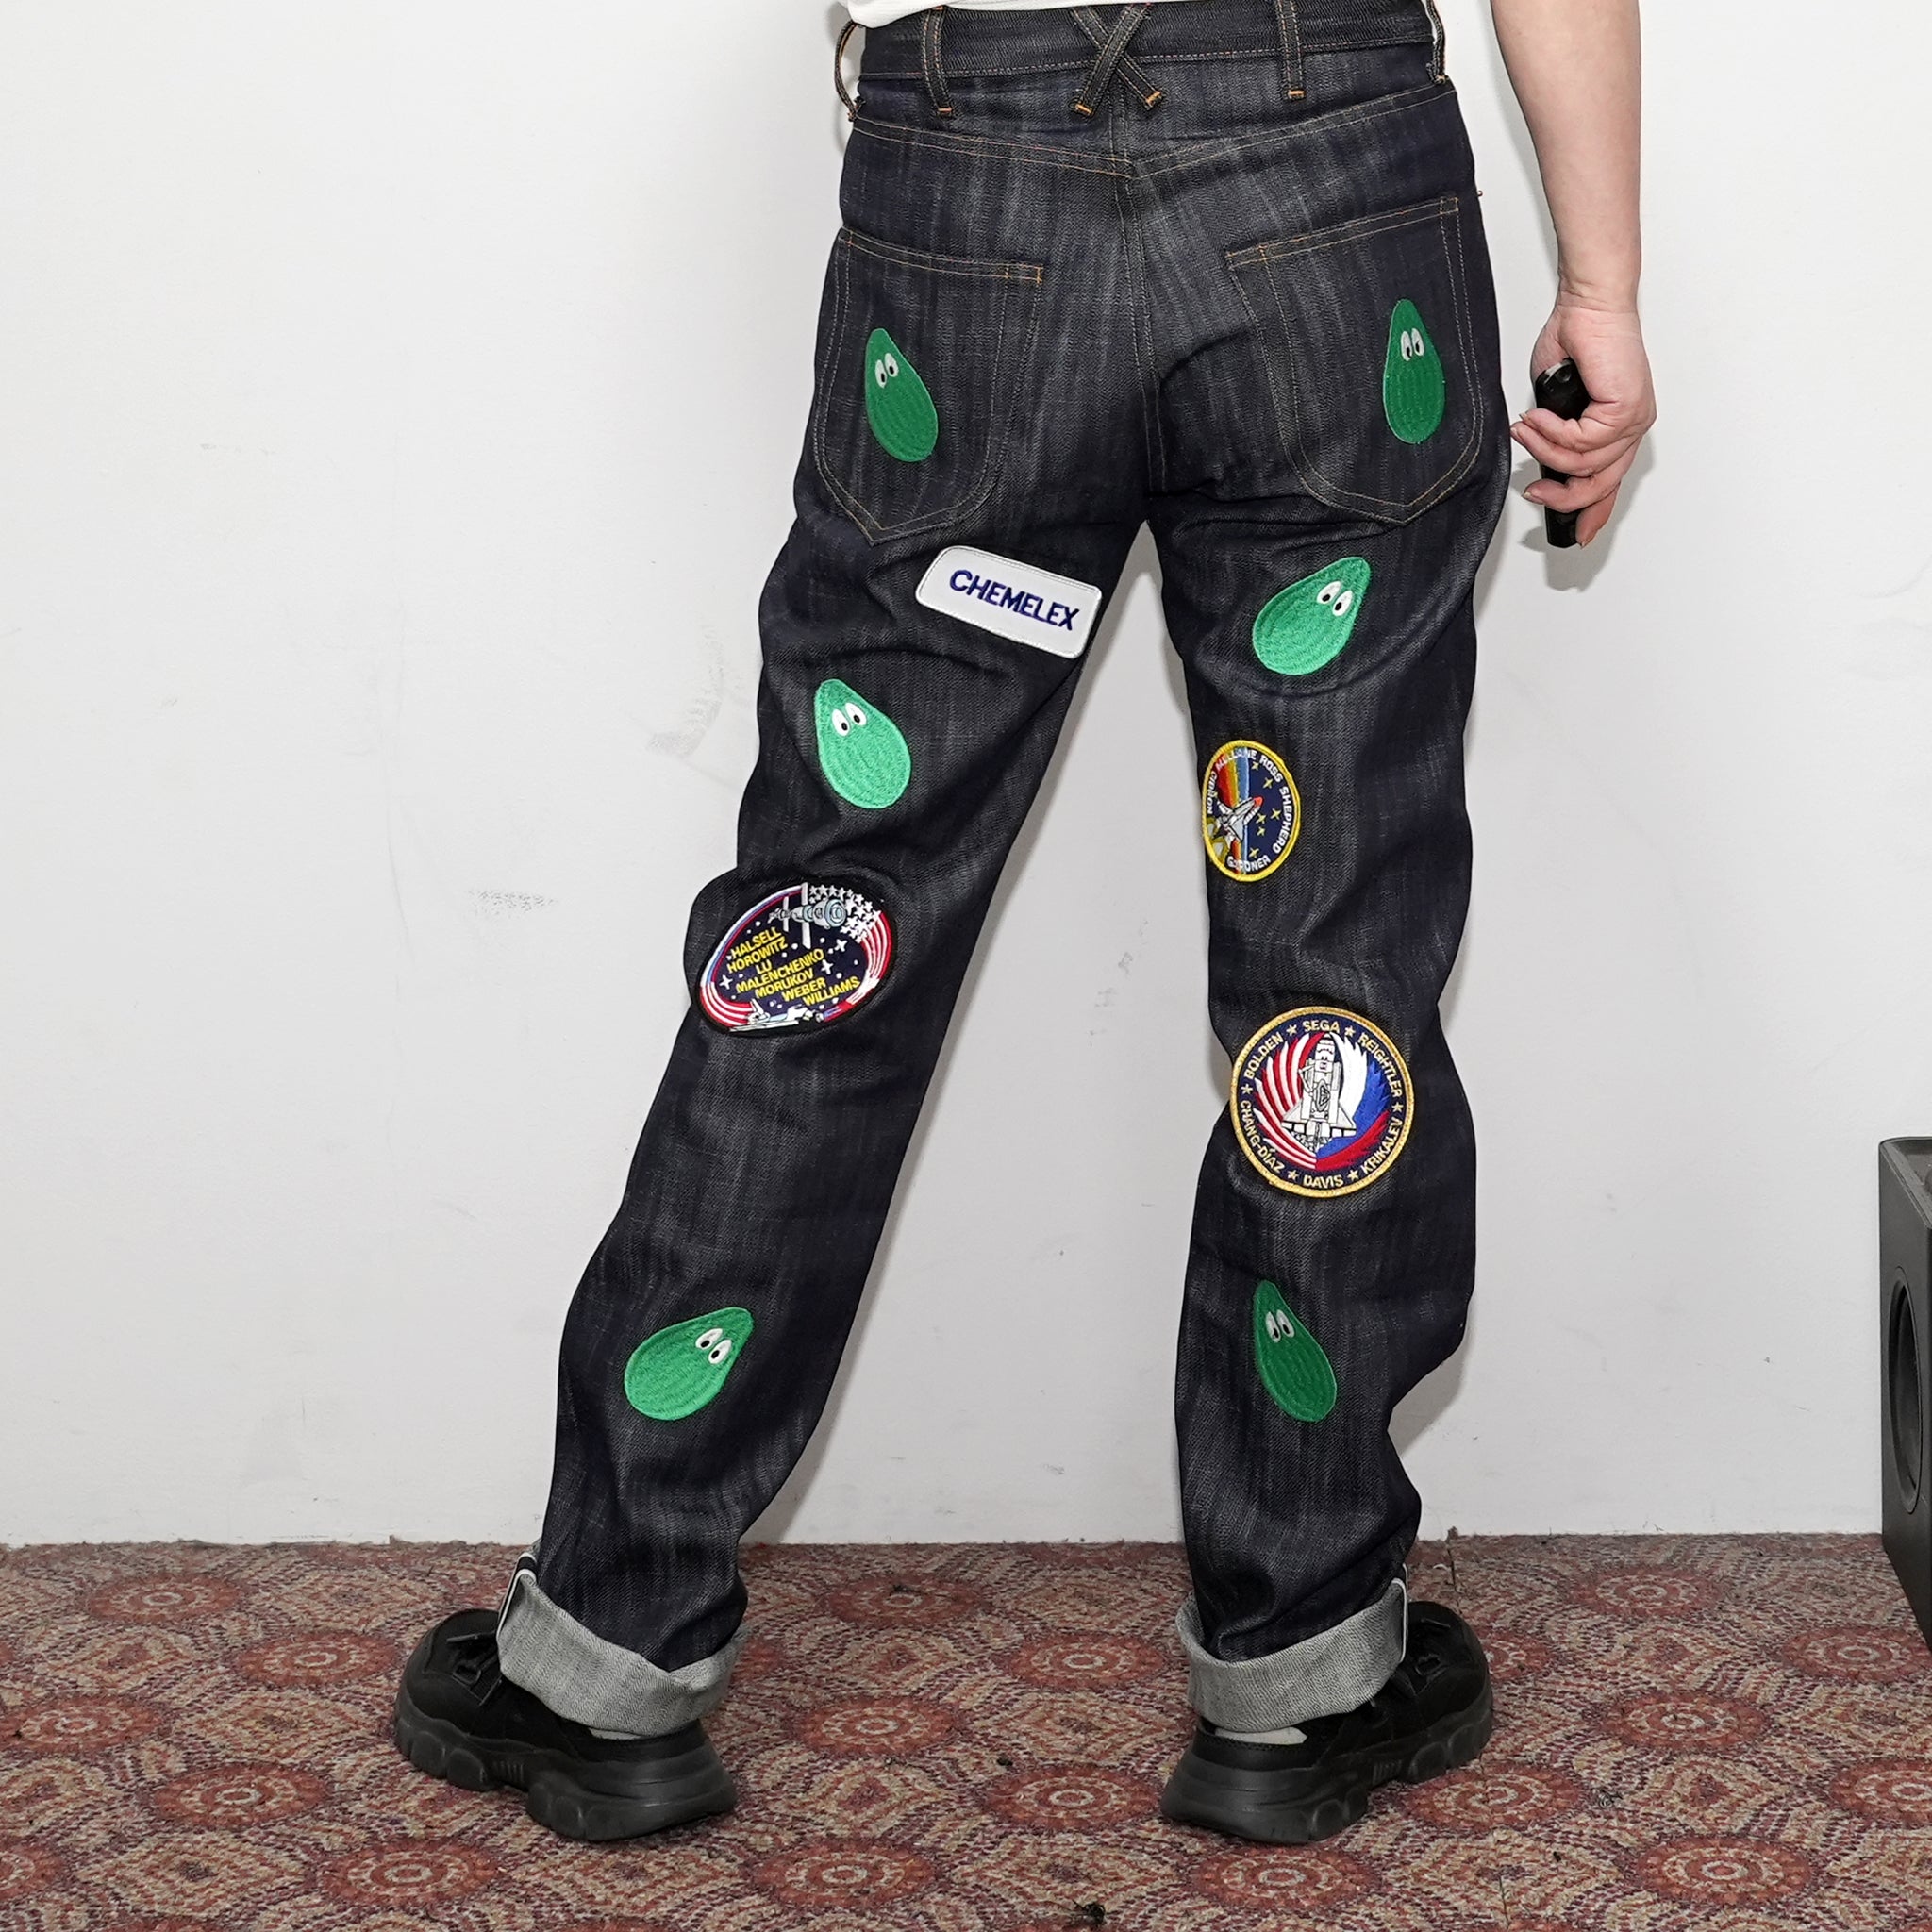 No:M31304 | Name:Monitaly Xx Jeans W/ Avocado Embroidery And Patches | Color:Cone Ds Selvage Denim【MONITALY_モニタリー】